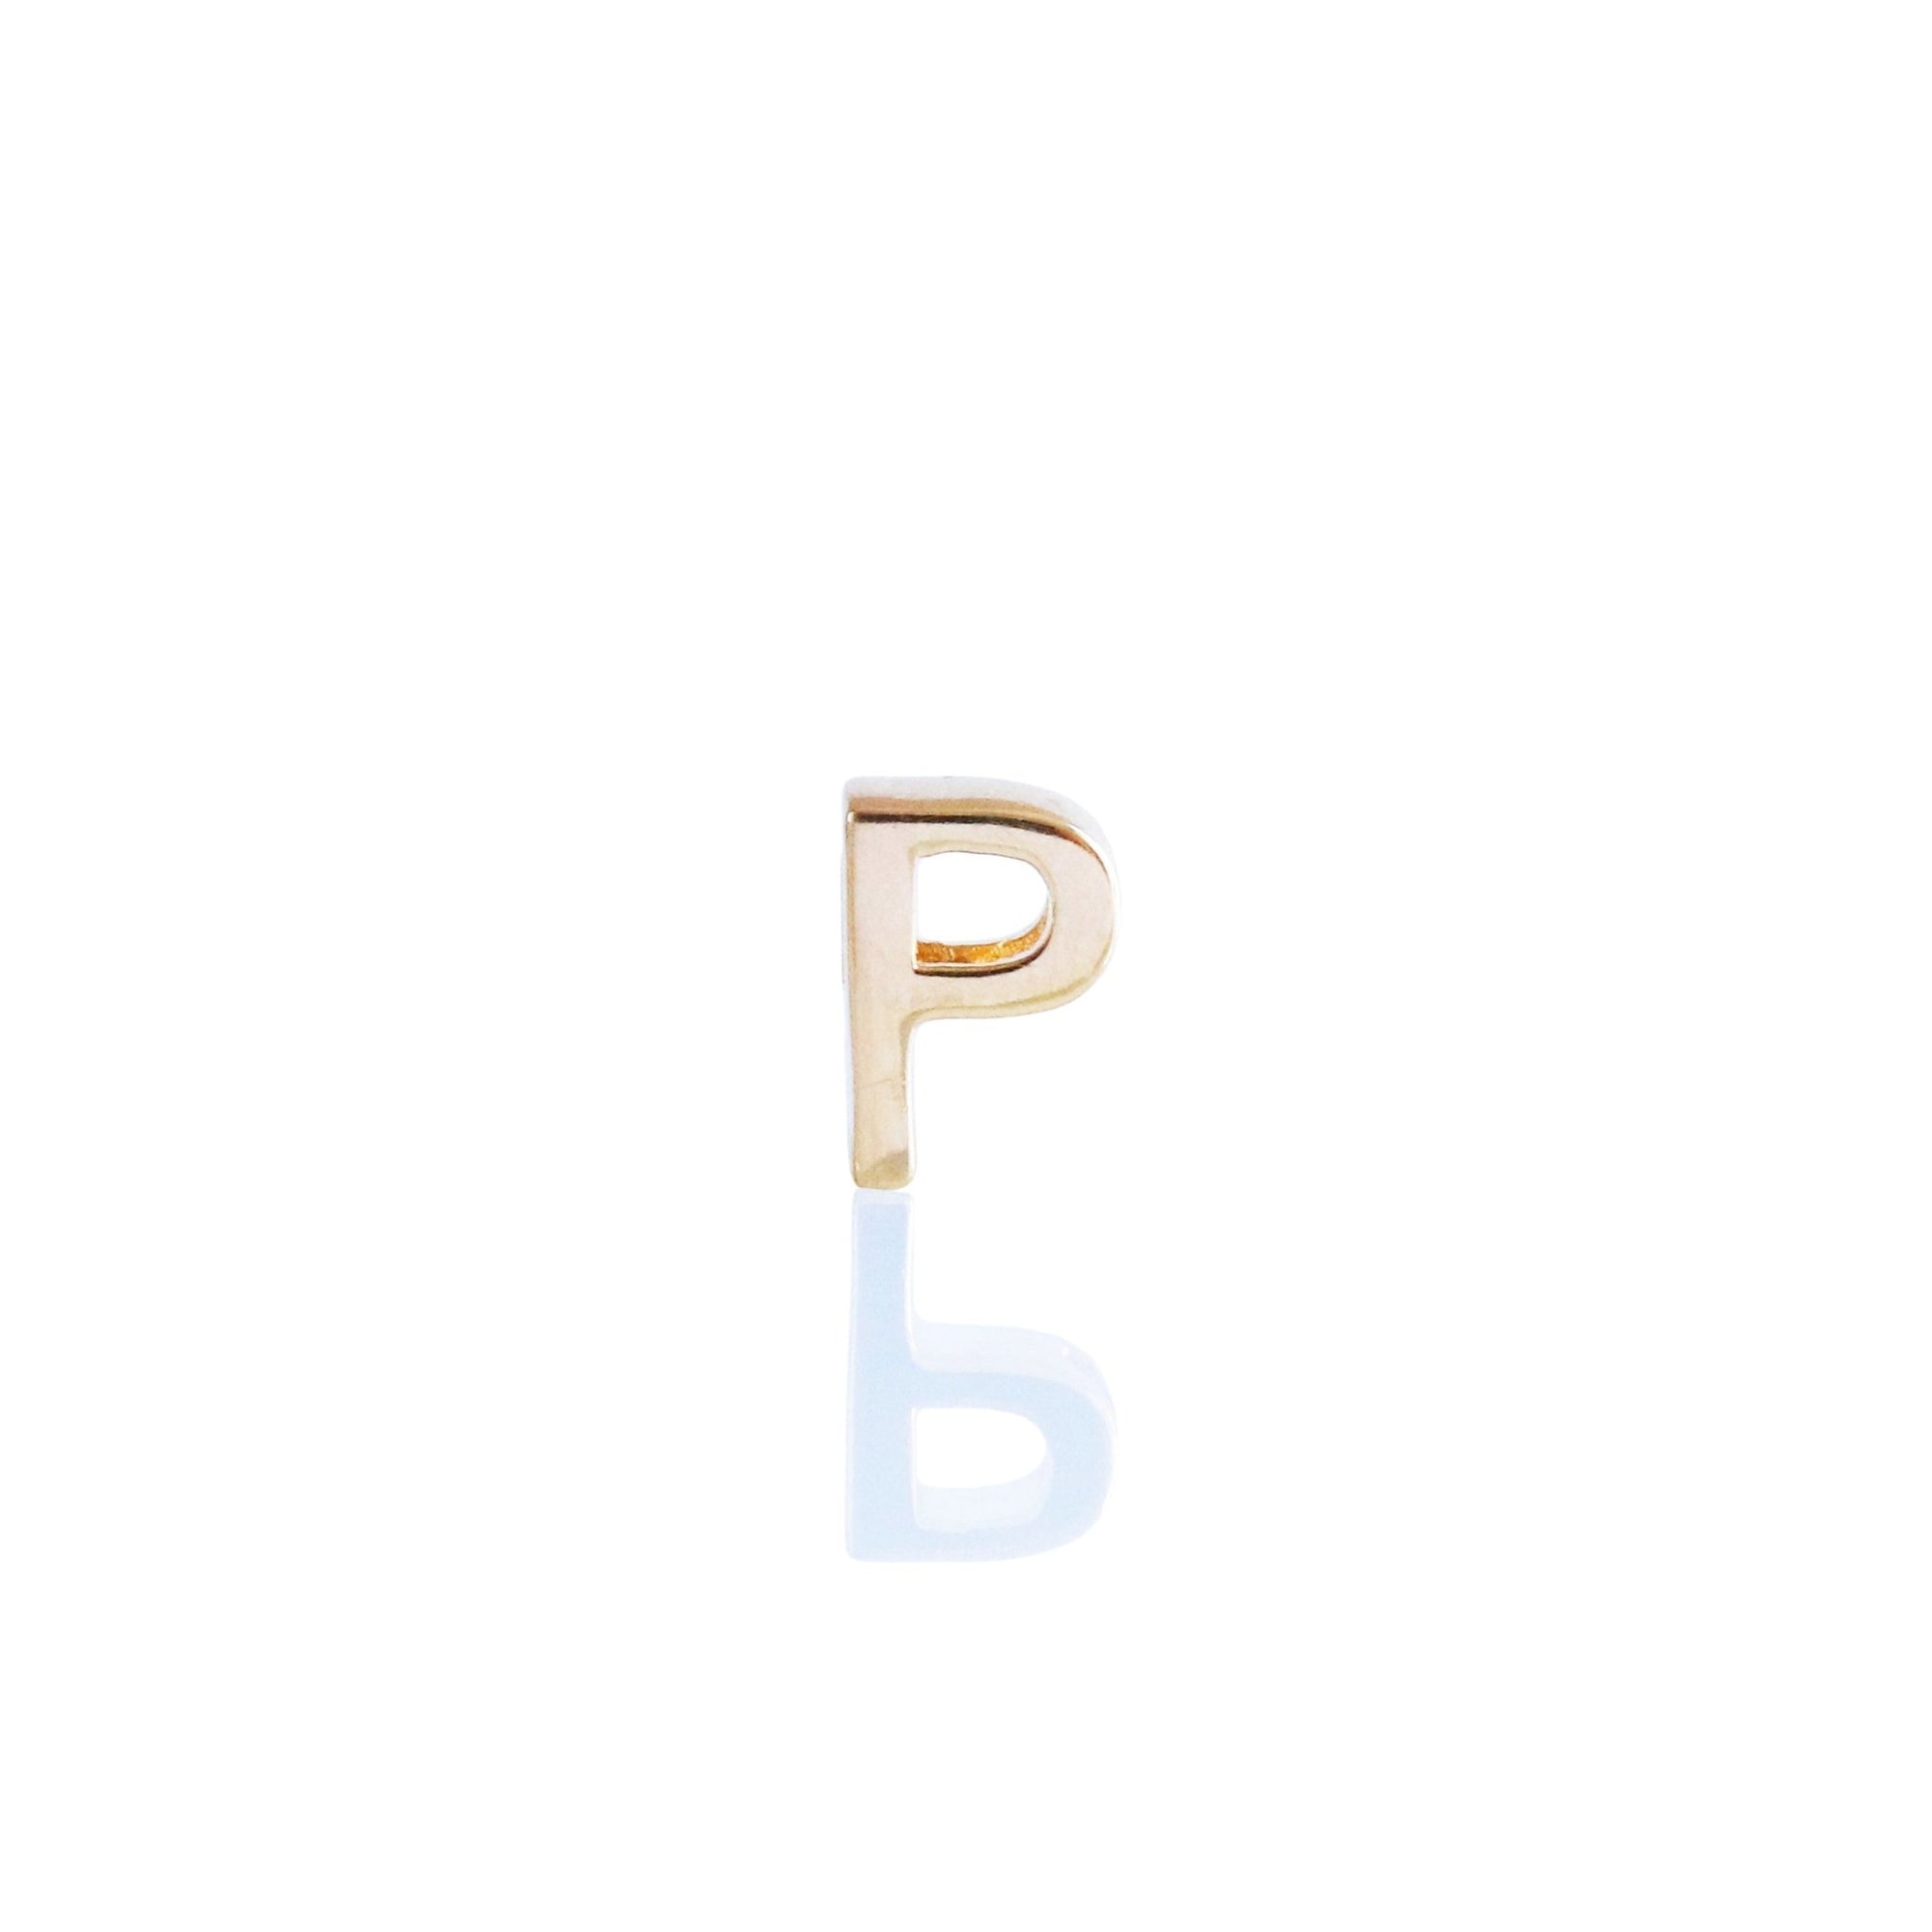 CHARMED INITIAL - P - GOLD OR SILVER - SO PRETTY CARA COTTER